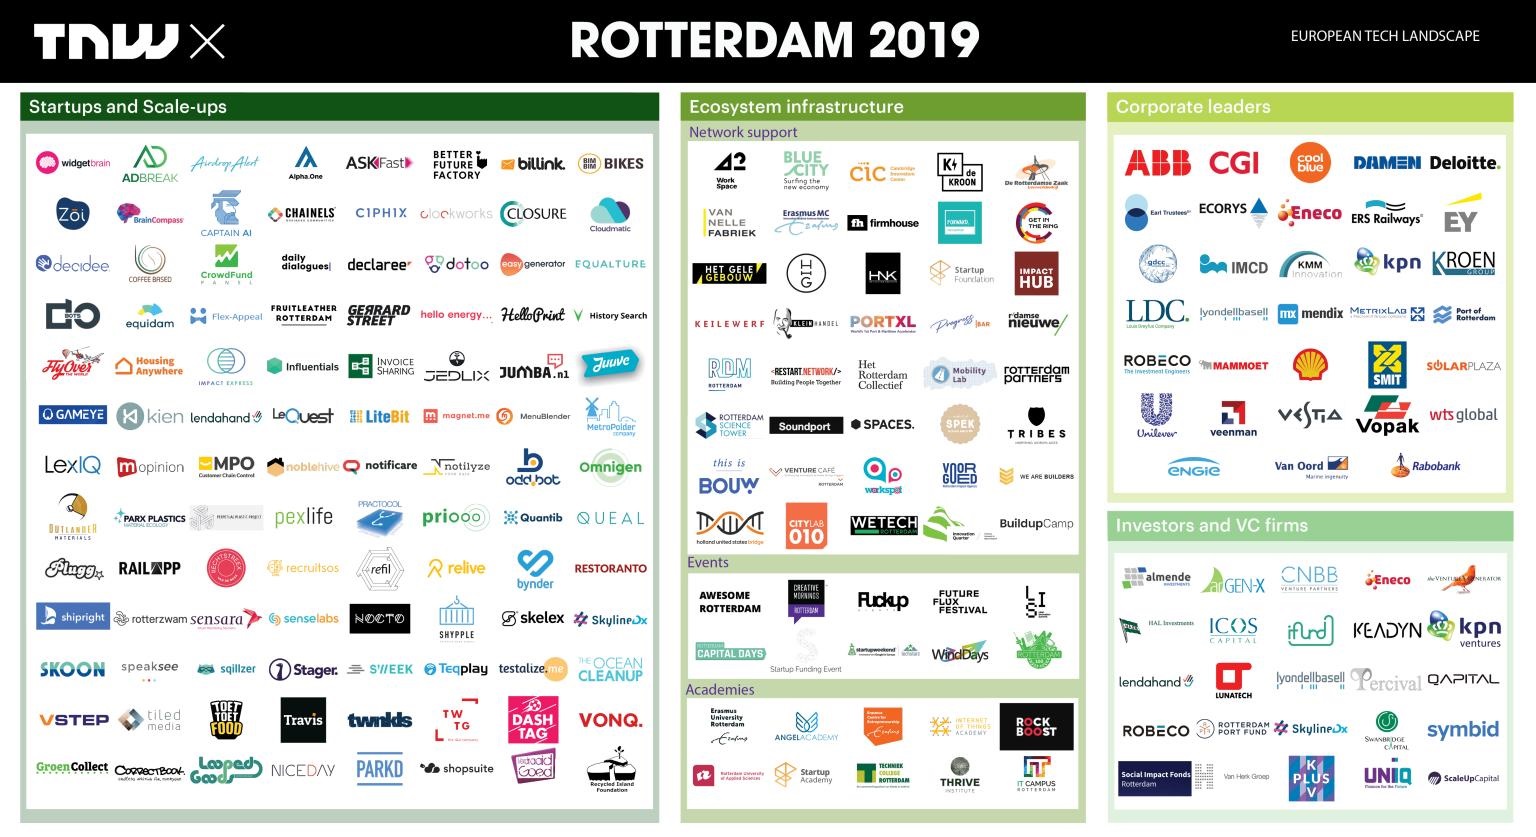 Airdrop Alert listed as Best Start-ups & Scale Ups of Rotterdam